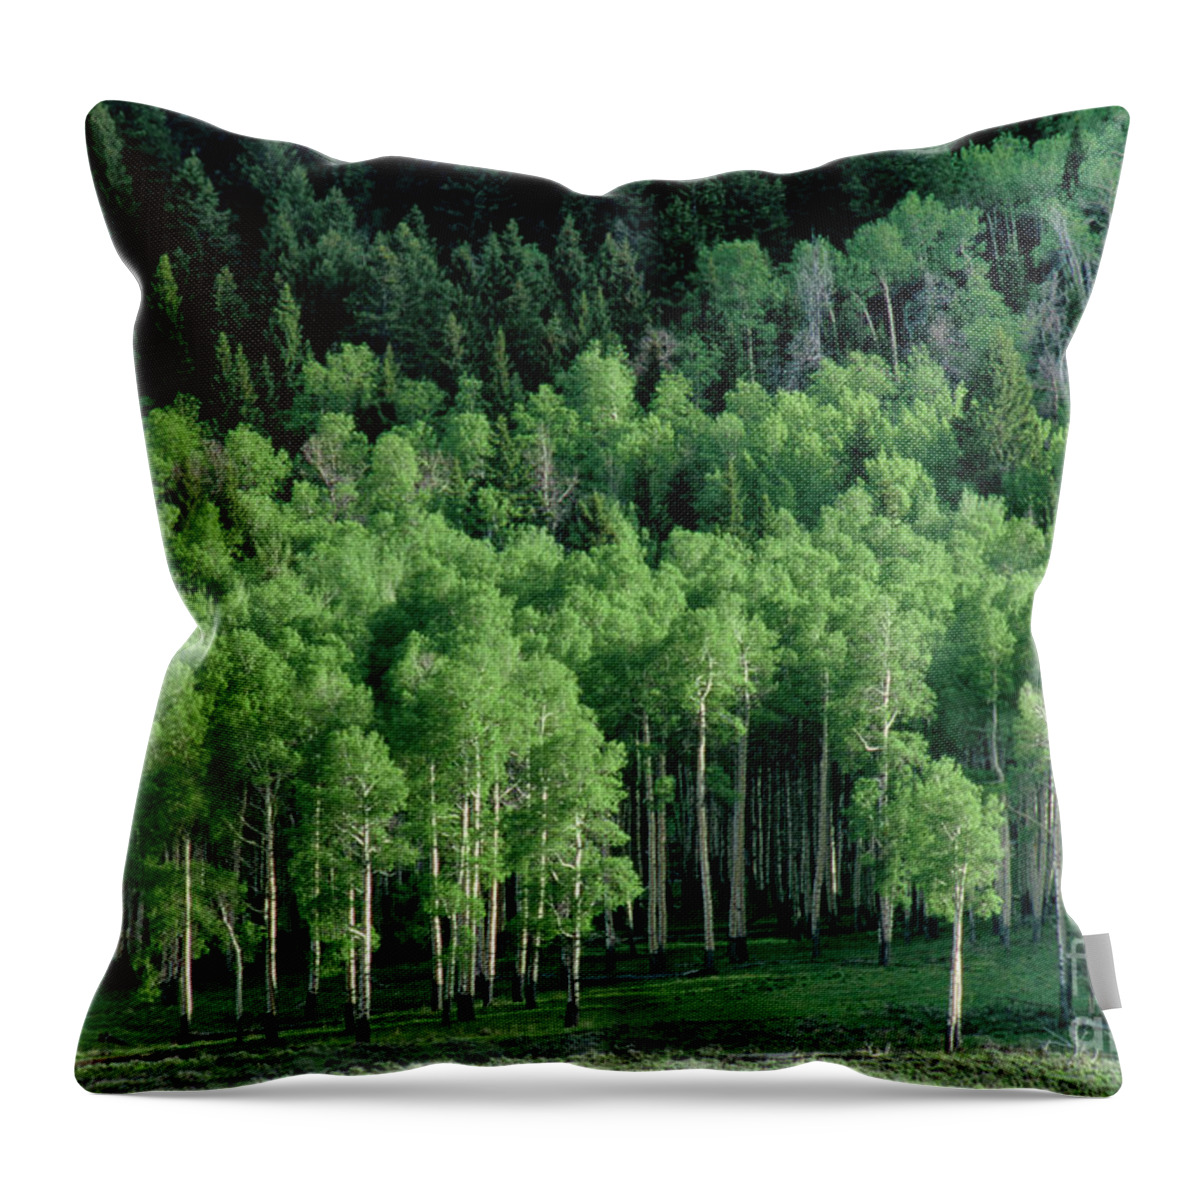 Dave Welling Throw Pillow featuring the photograph Apen Grove On North Rim Grand Canyon Arizona by Dave Welling